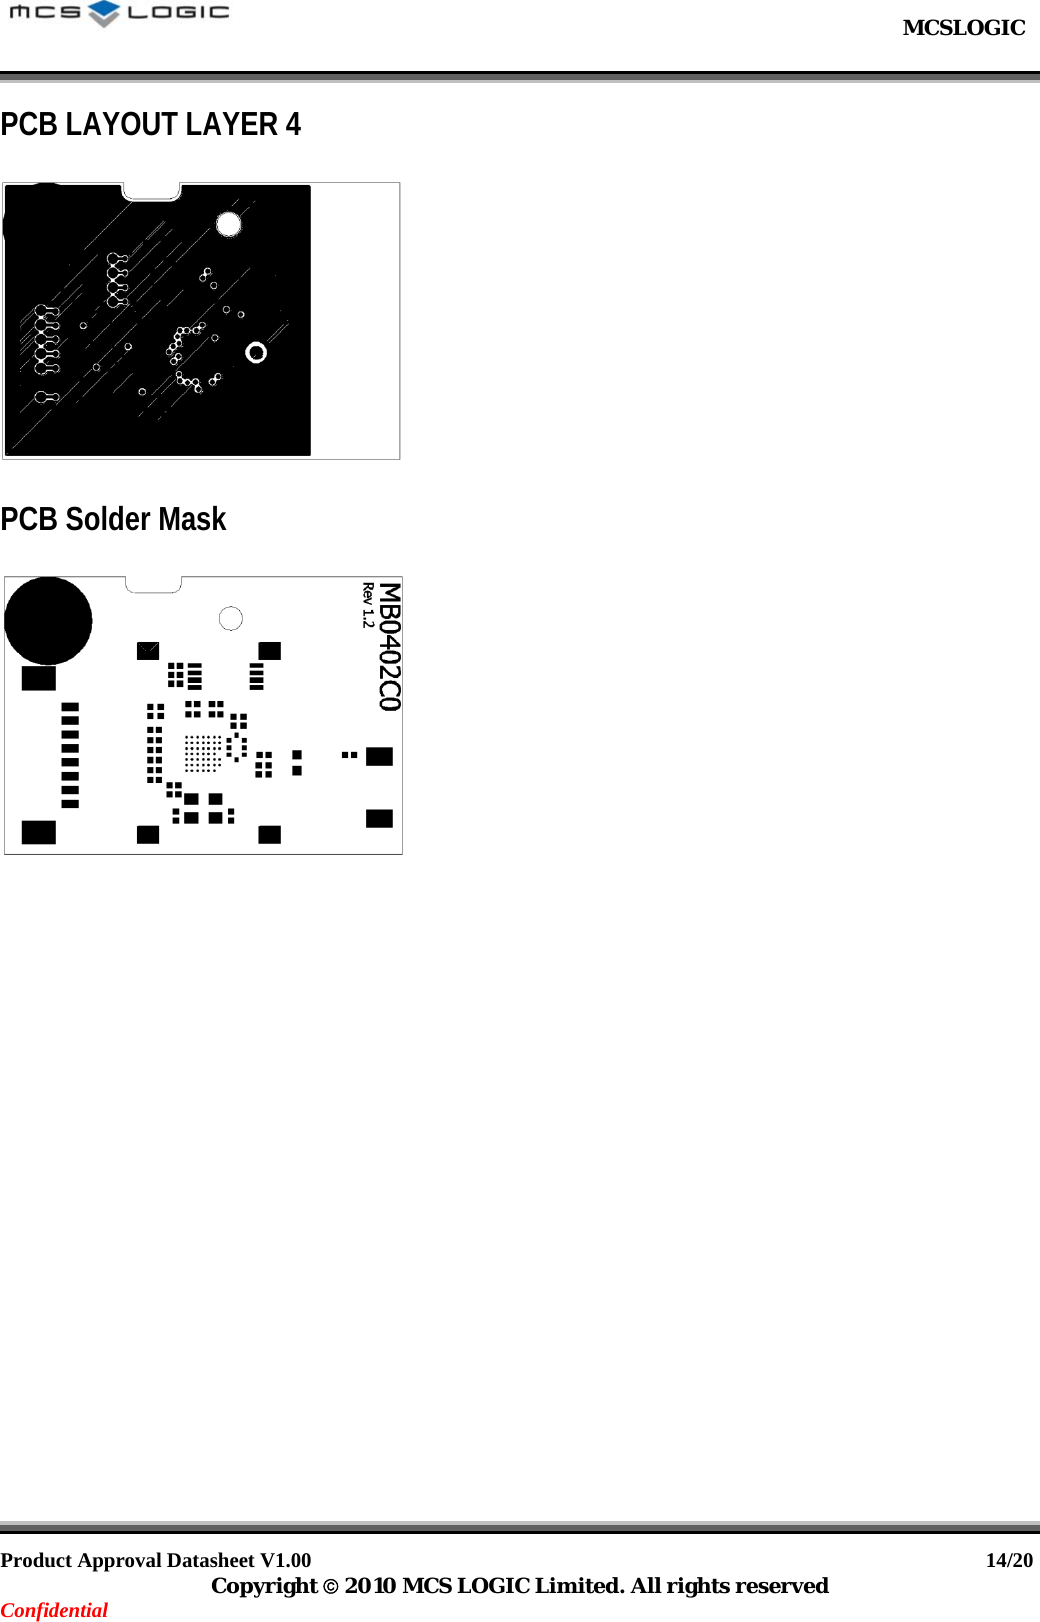                                                           MCSLOGIC                                                                                     Product Approval Datasheet V1.00                                                                  14/20 Copyright © 2010 MCS LOGIC Limited. All rights reserved Confidential PCB LAYOUT LAYER 4    PCB Solder Mask    